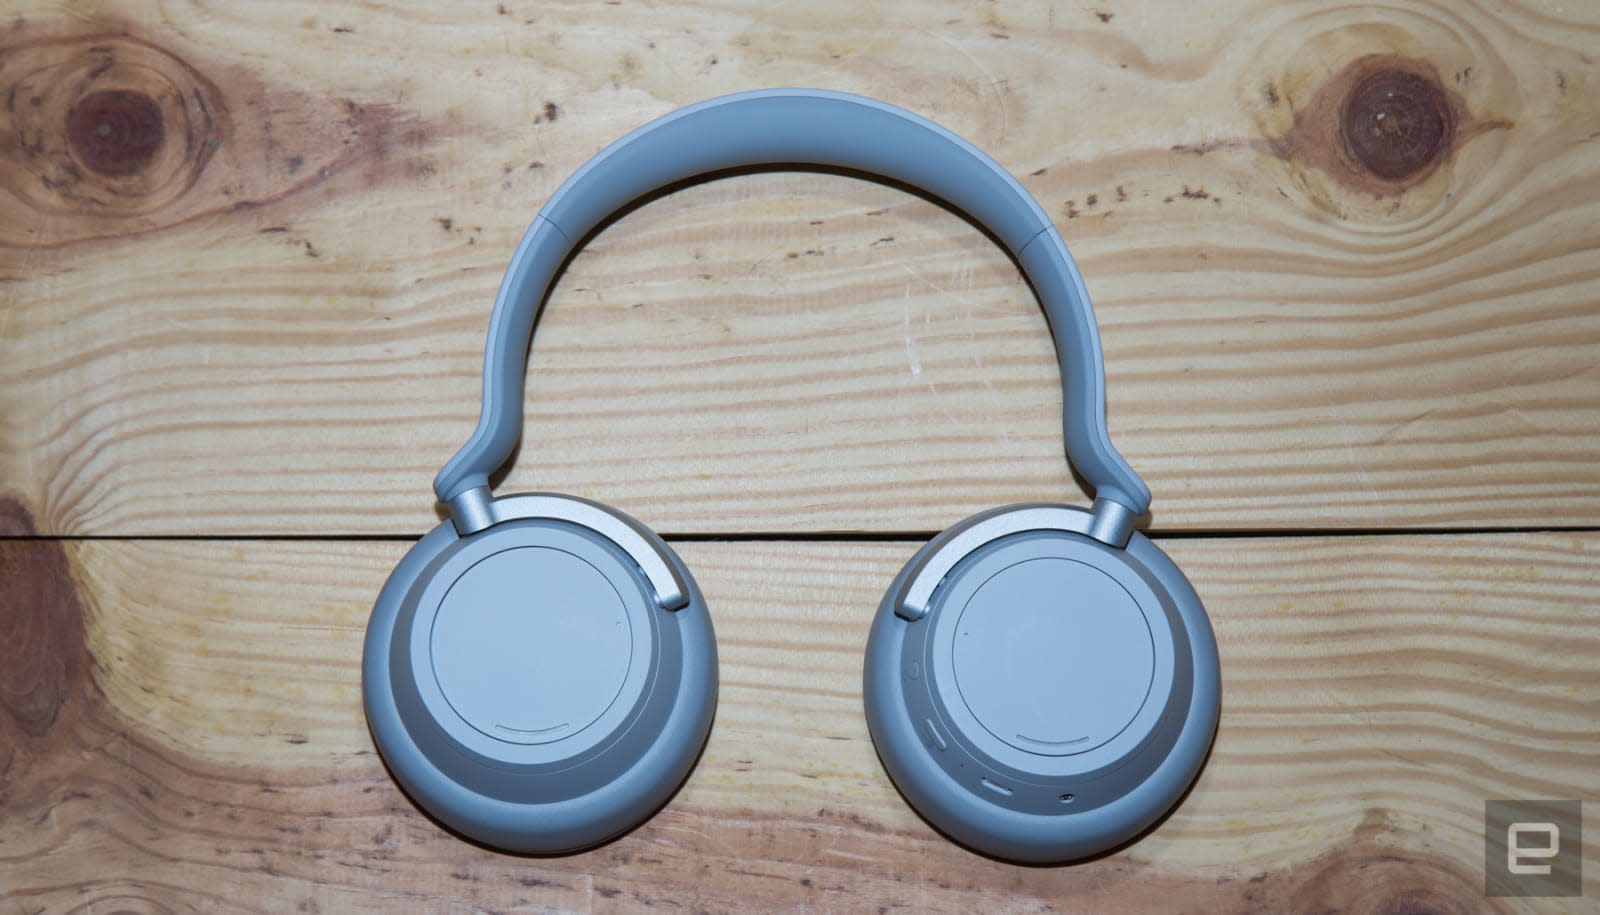 Microsoft’s Surface Headphones are a good first try